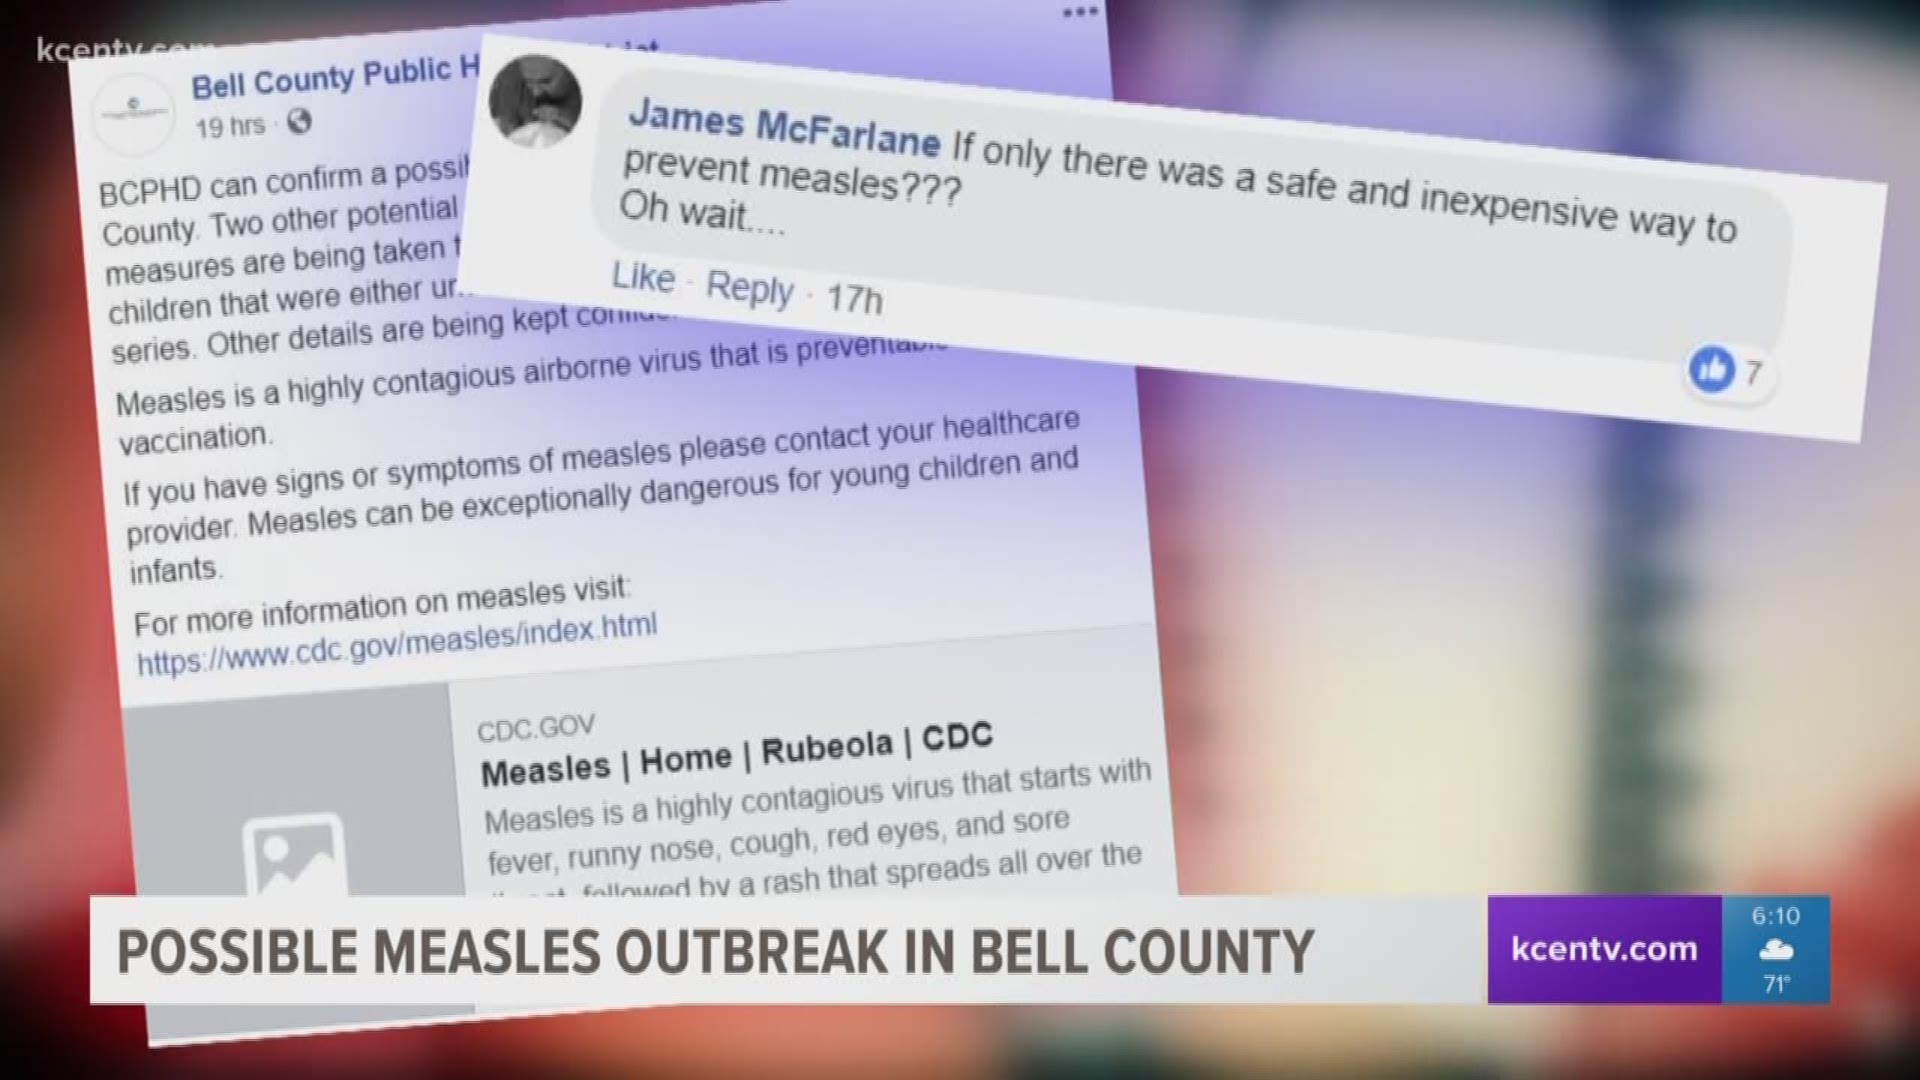 A Facebook post from the Bell County Health District said it was looking into three cases last night. Two of the cases have been ruled out, but one possible case still remains. An update on the last case isn't expected until later in the week.